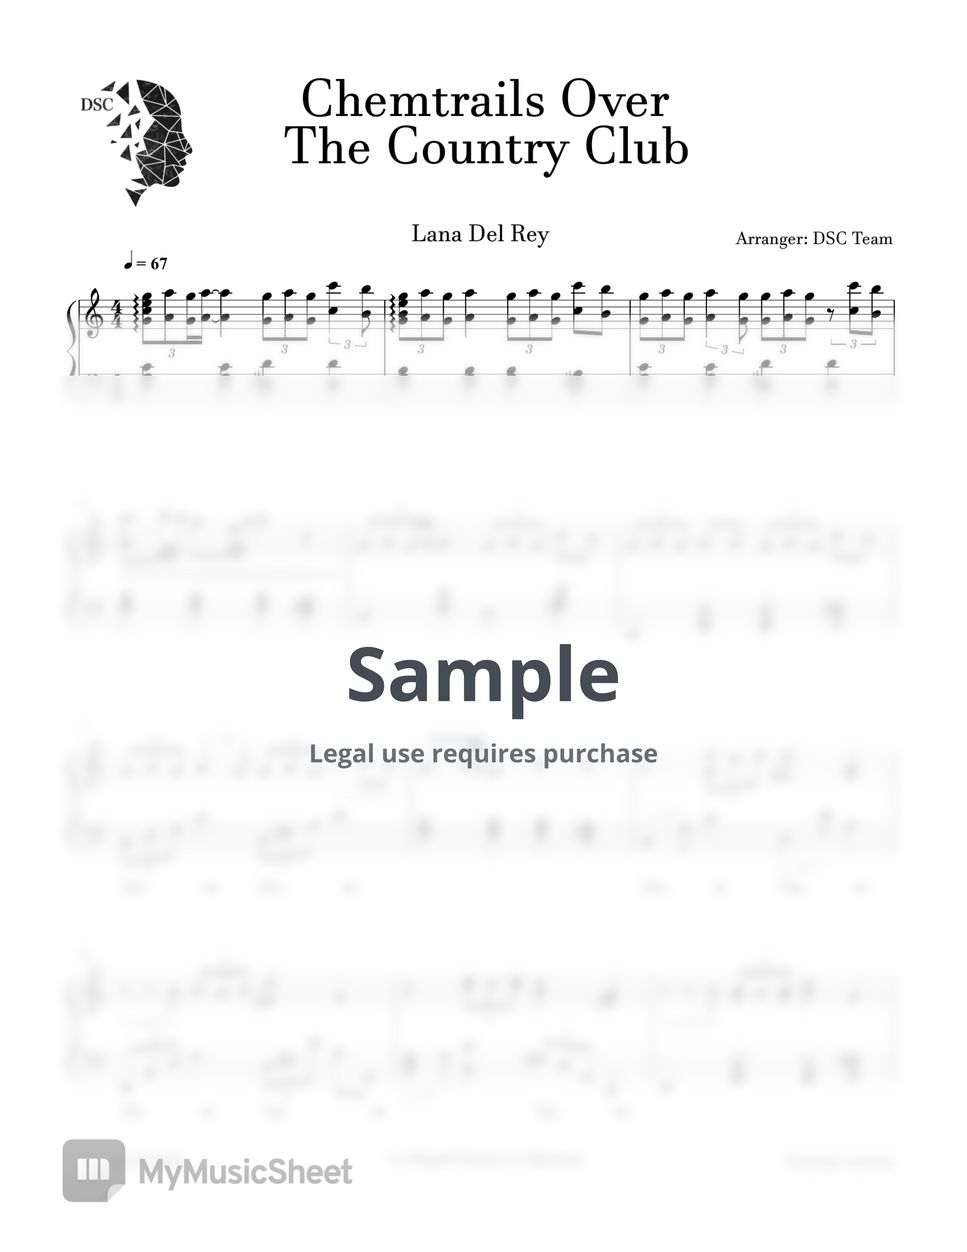 Lana Del Rey - Chemtrails Over The Country Club by Digital Scores Collection